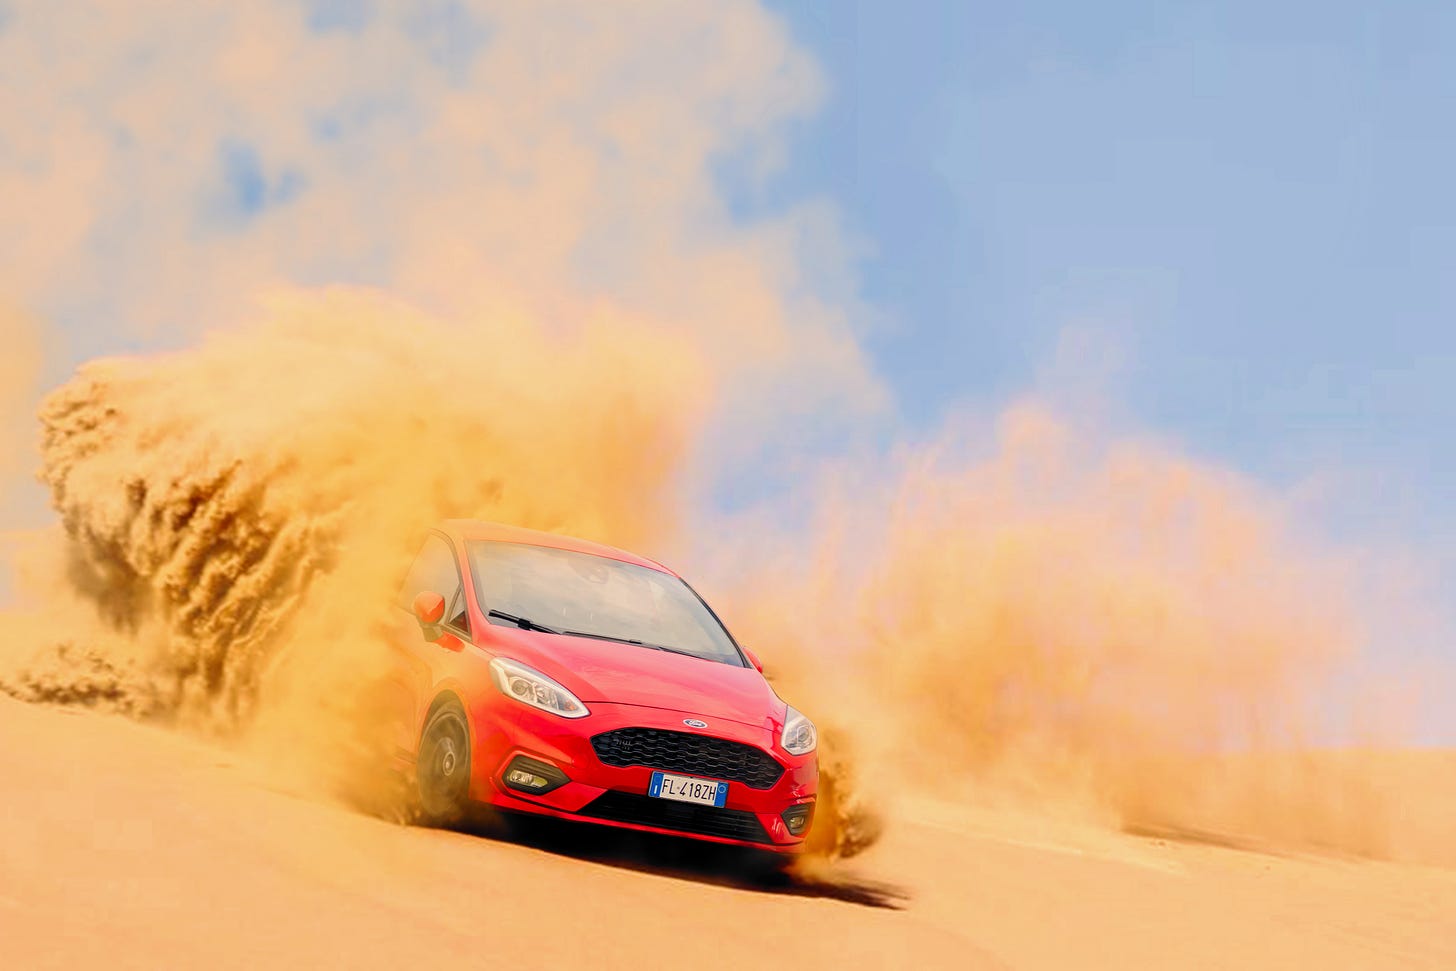 Free Red Ford Focus Vehicle Driving on Sand Under Blue Daytime Sky Stock Photo